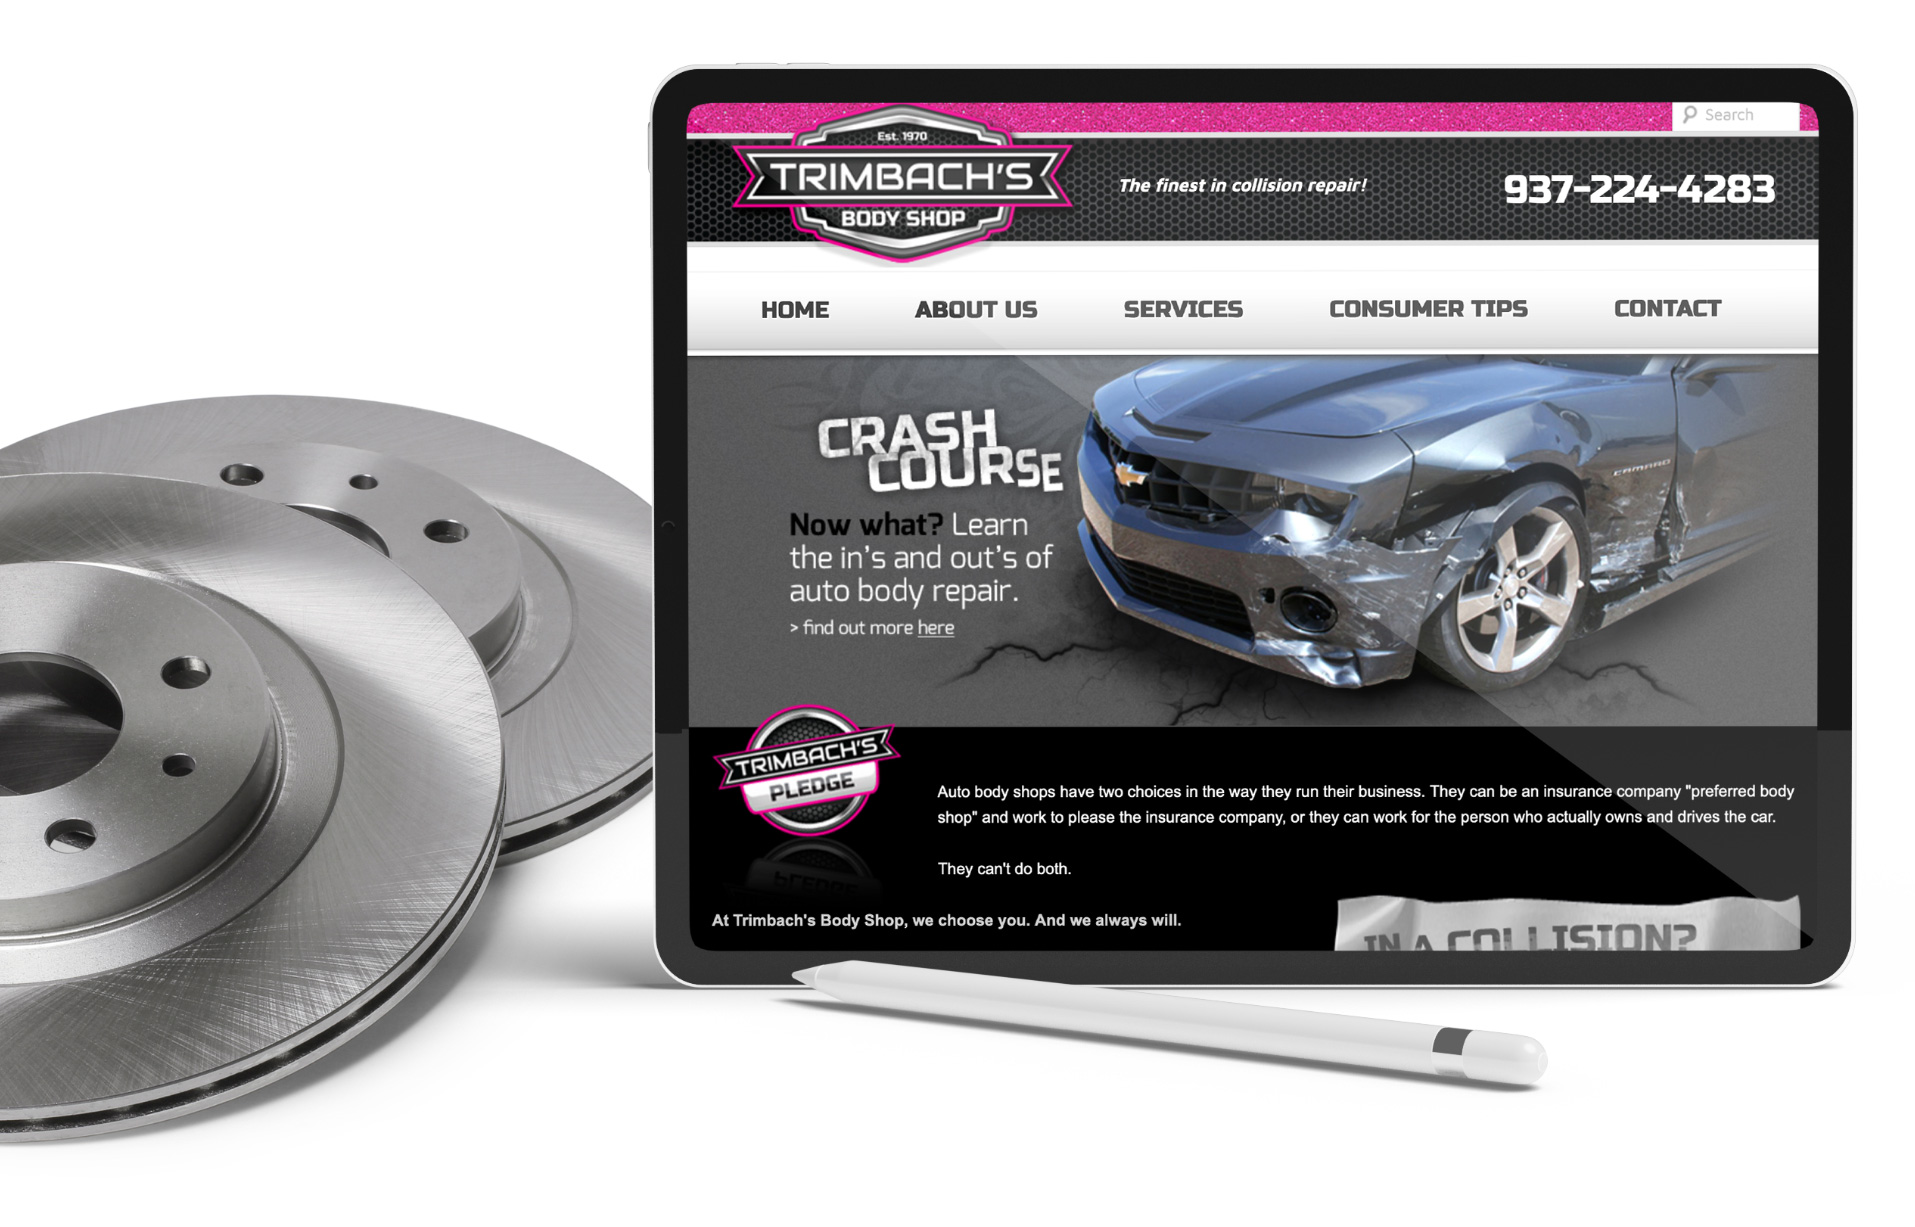 Trimbach's Body Shop home page on tabet